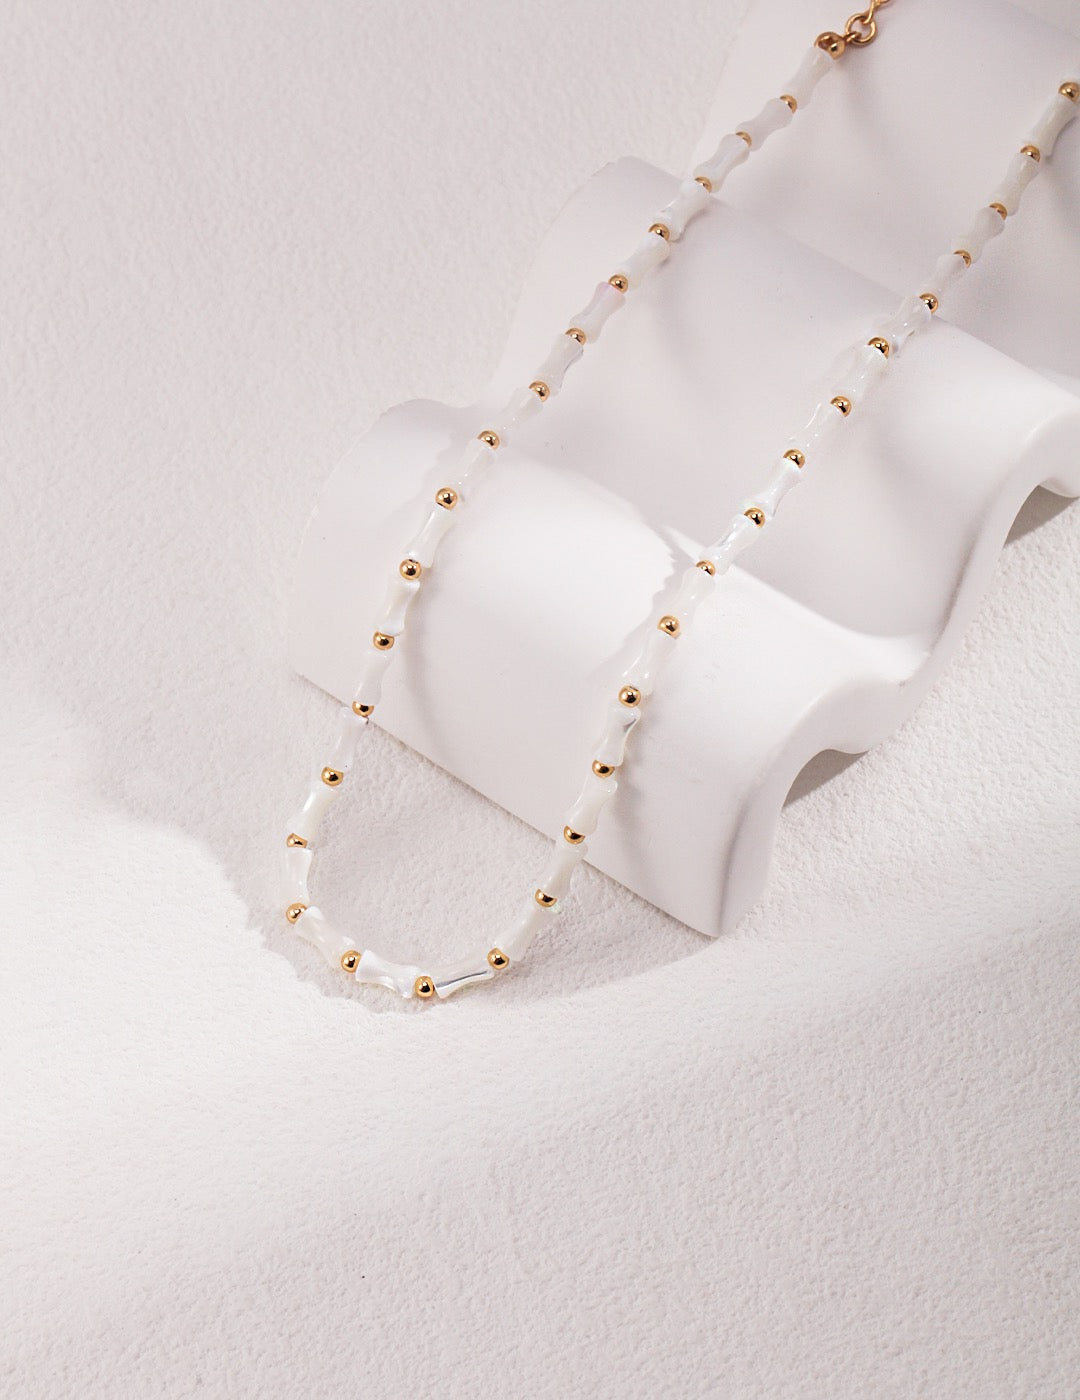 Bamboo Knot Pearl Necklace - S925 Sterling Silver with 18K Gold Vermeil - Pearl Luminance - Graceful Orchid elegance